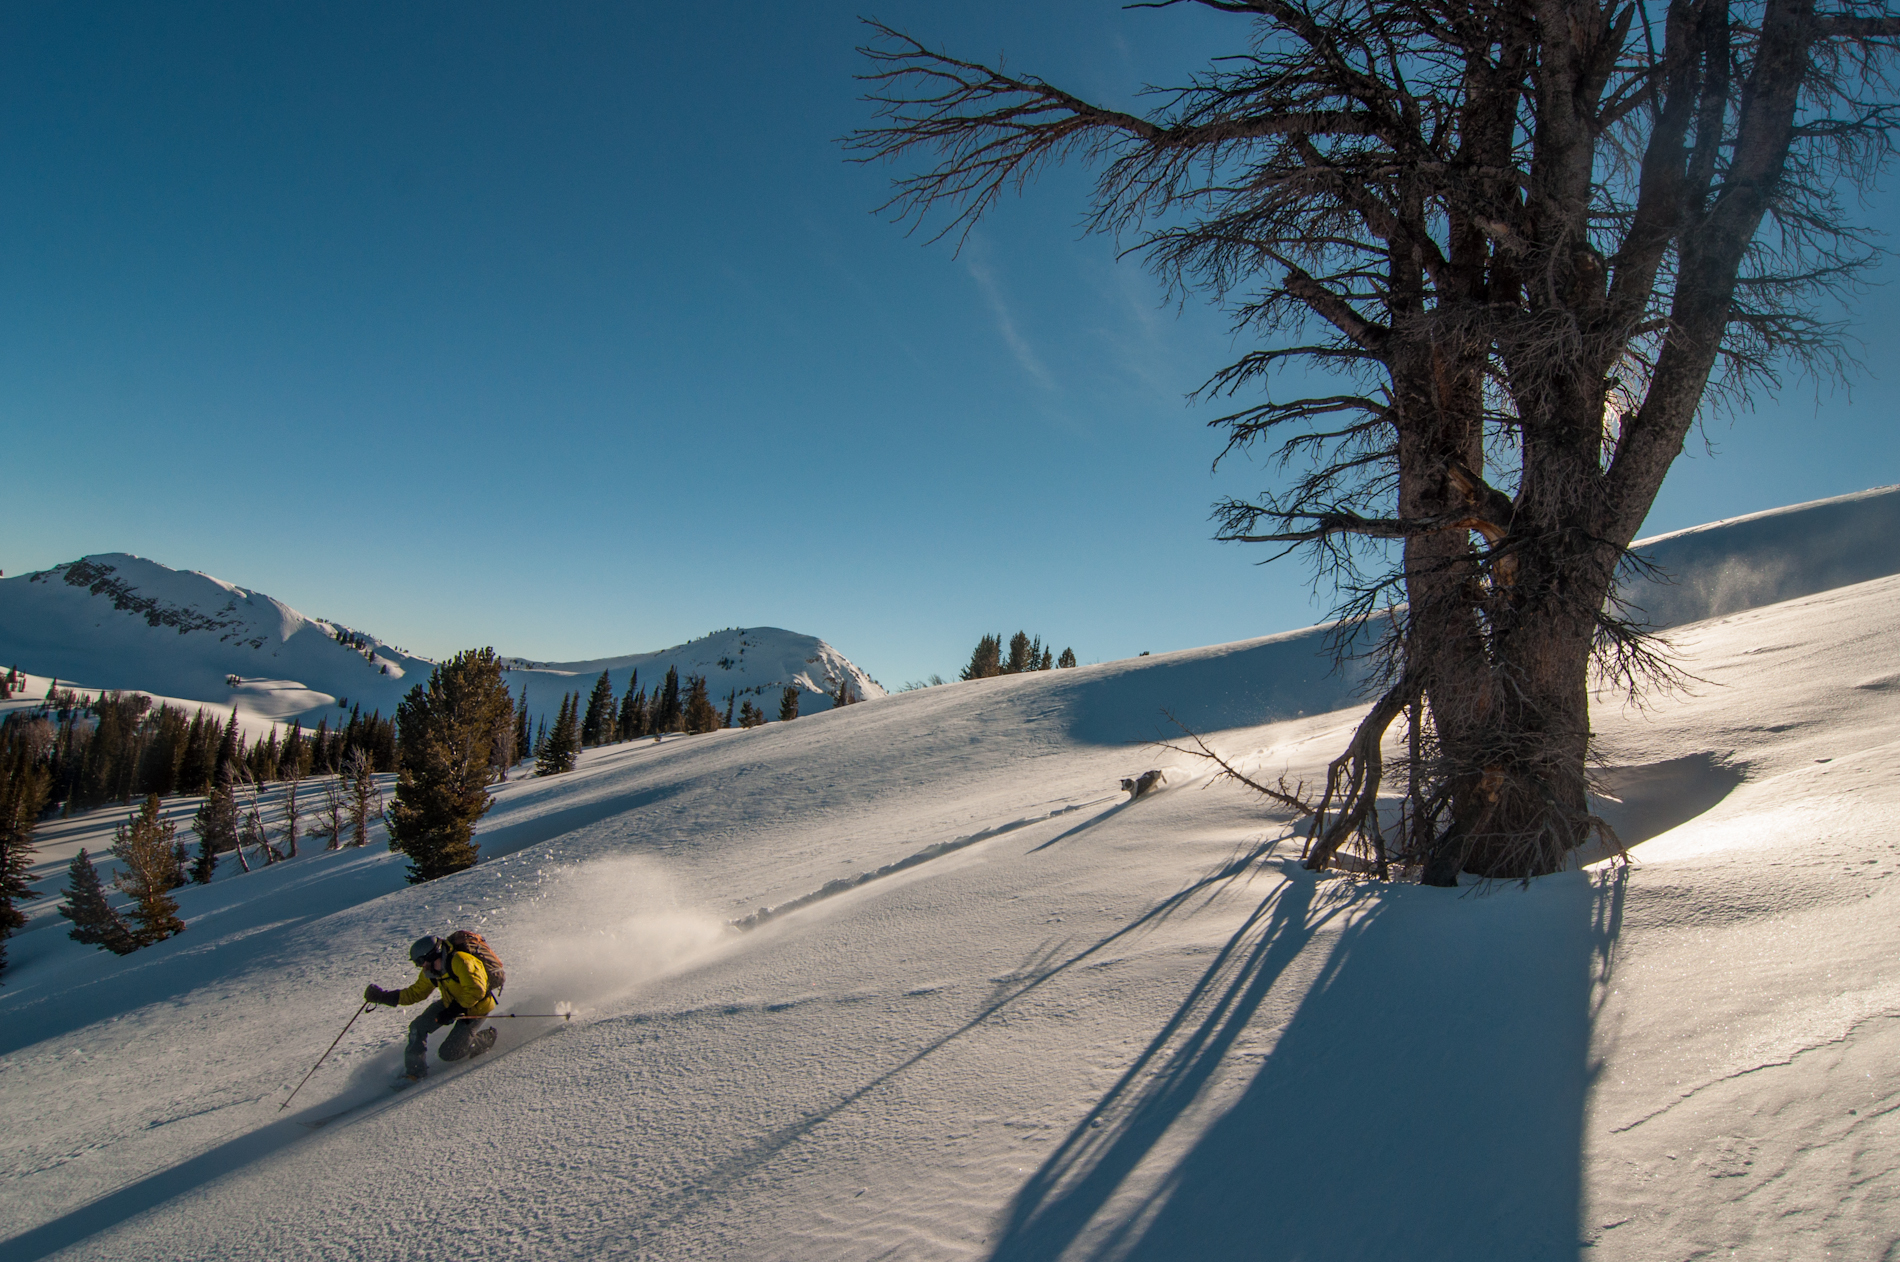 Rob and Finn catch some late afternoon powder turns